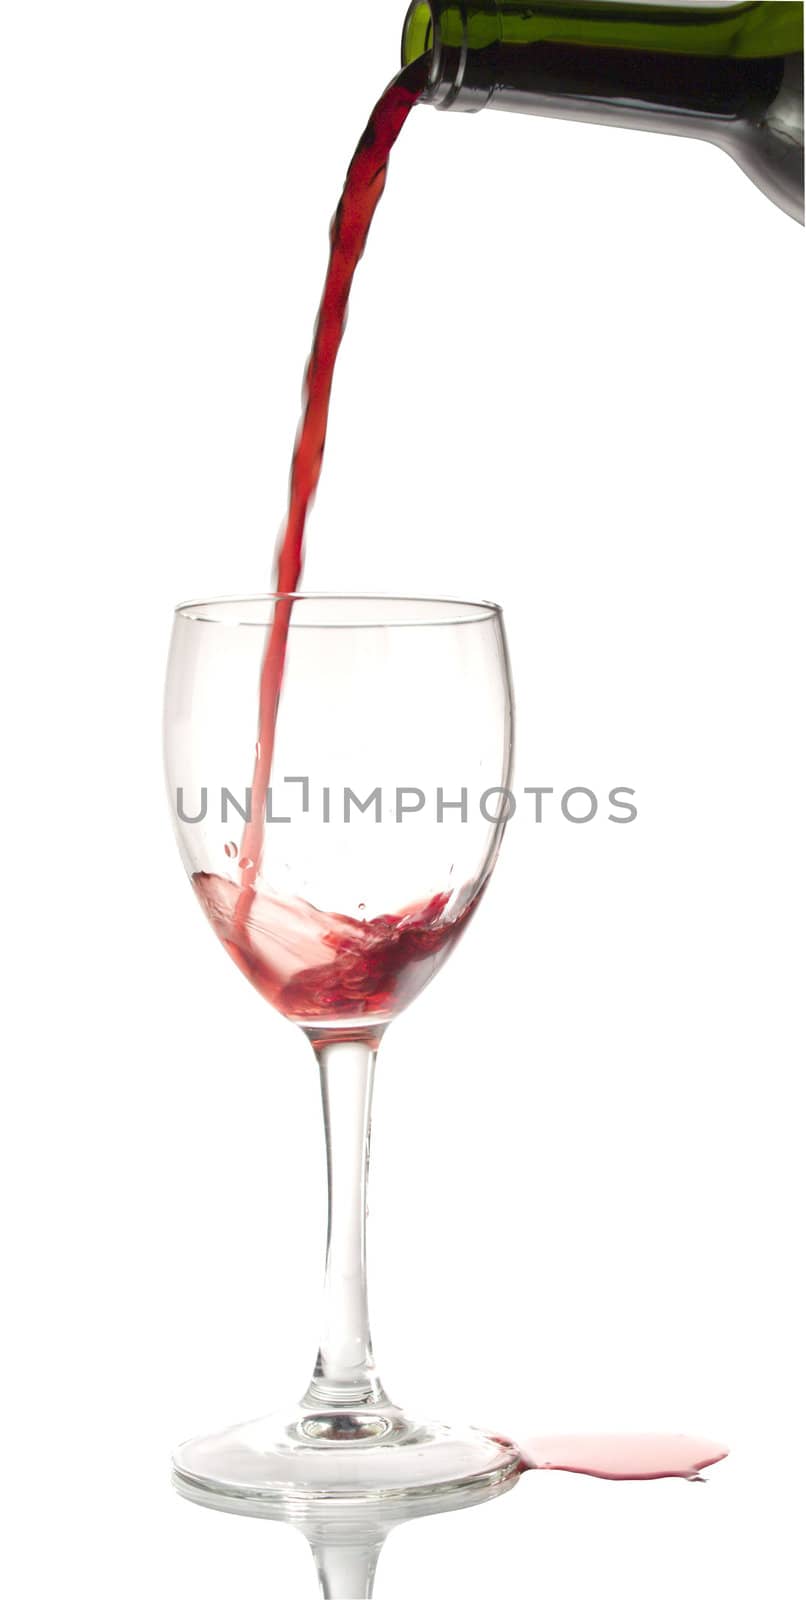 Pouring red wine into a wine glass.